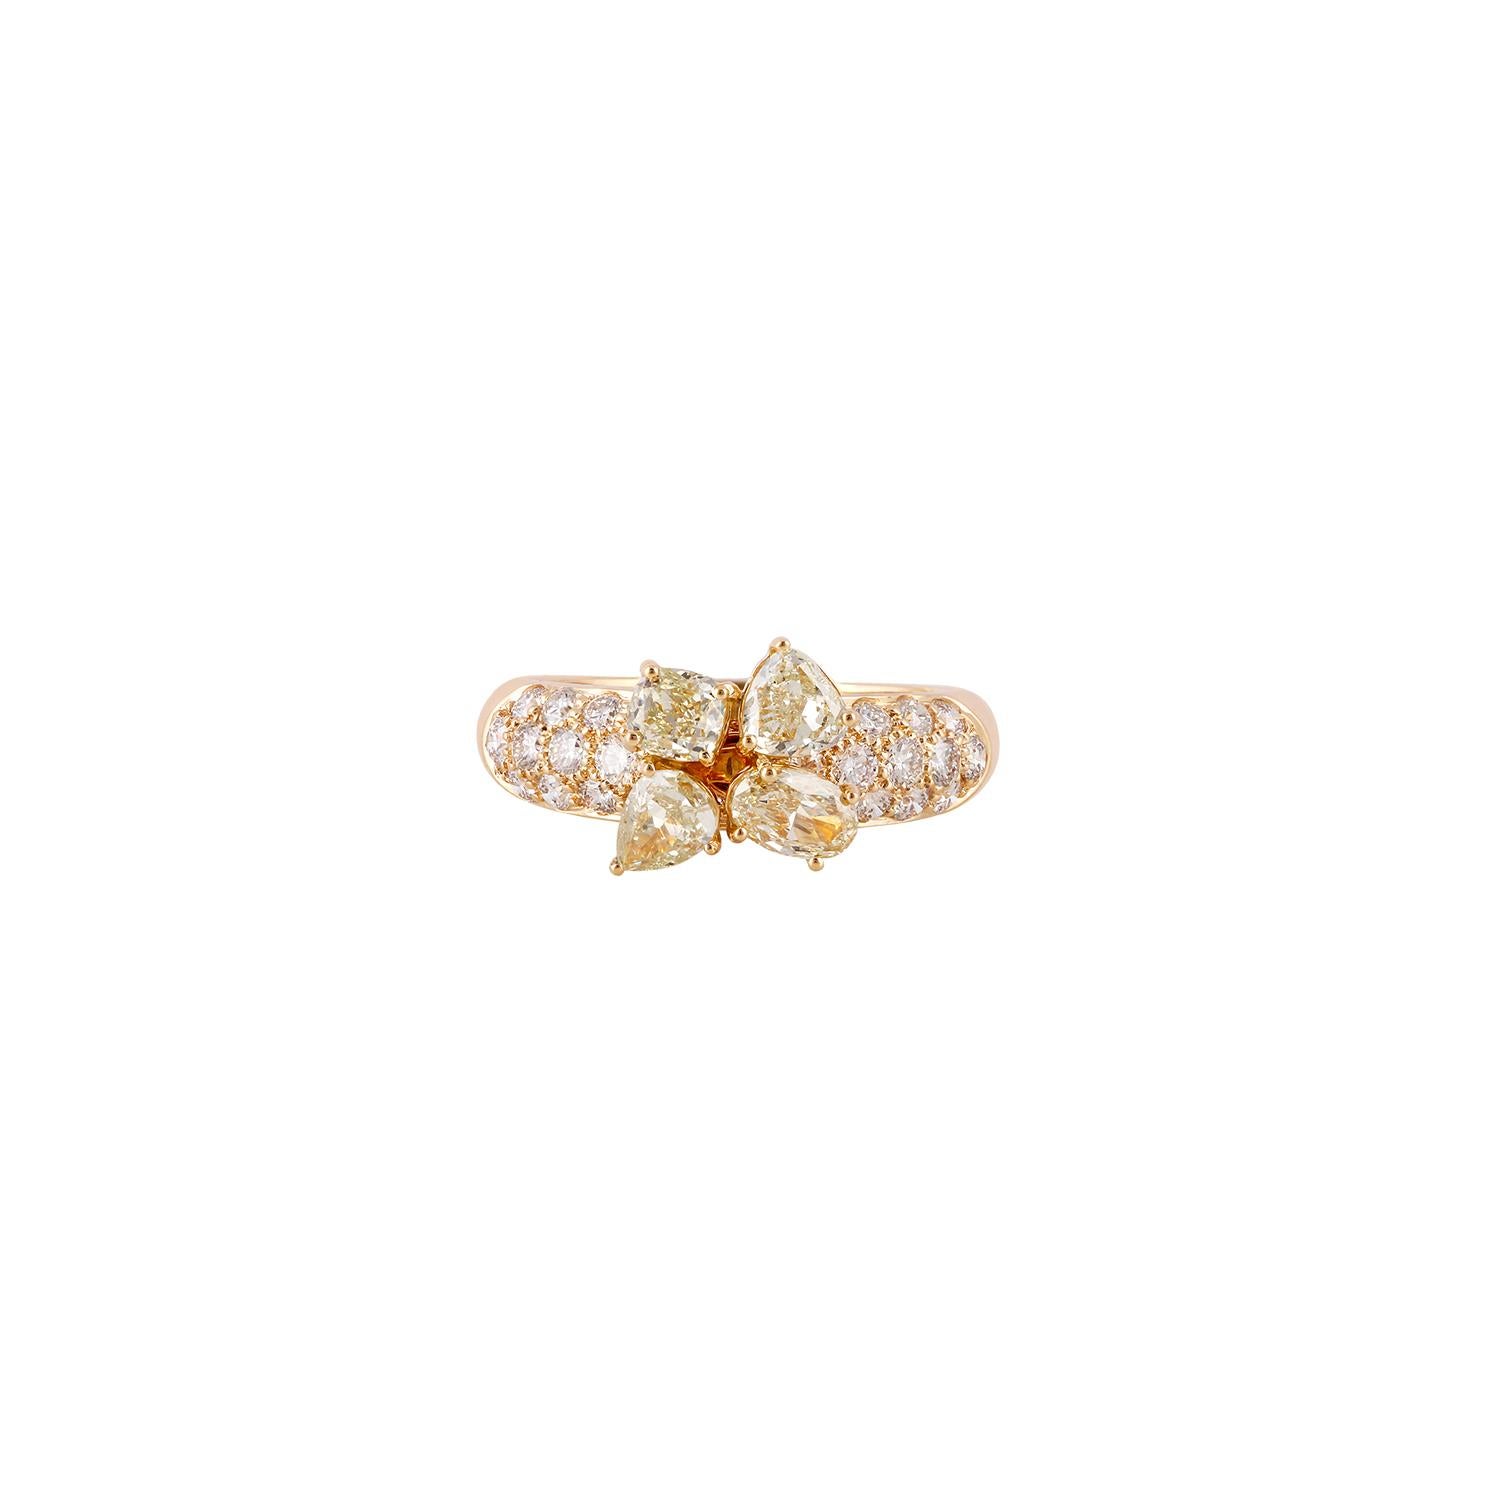 Its an exclusive yellow diamond ring studded in 18k yellow gold with 4 pieces multi shaped yellow diamonds weight 1.17 carat with 30 pieces round shaped brilliant cut diamonds weight 0.86 carat this entire ring studded in 18k yellow gold weight 4.31